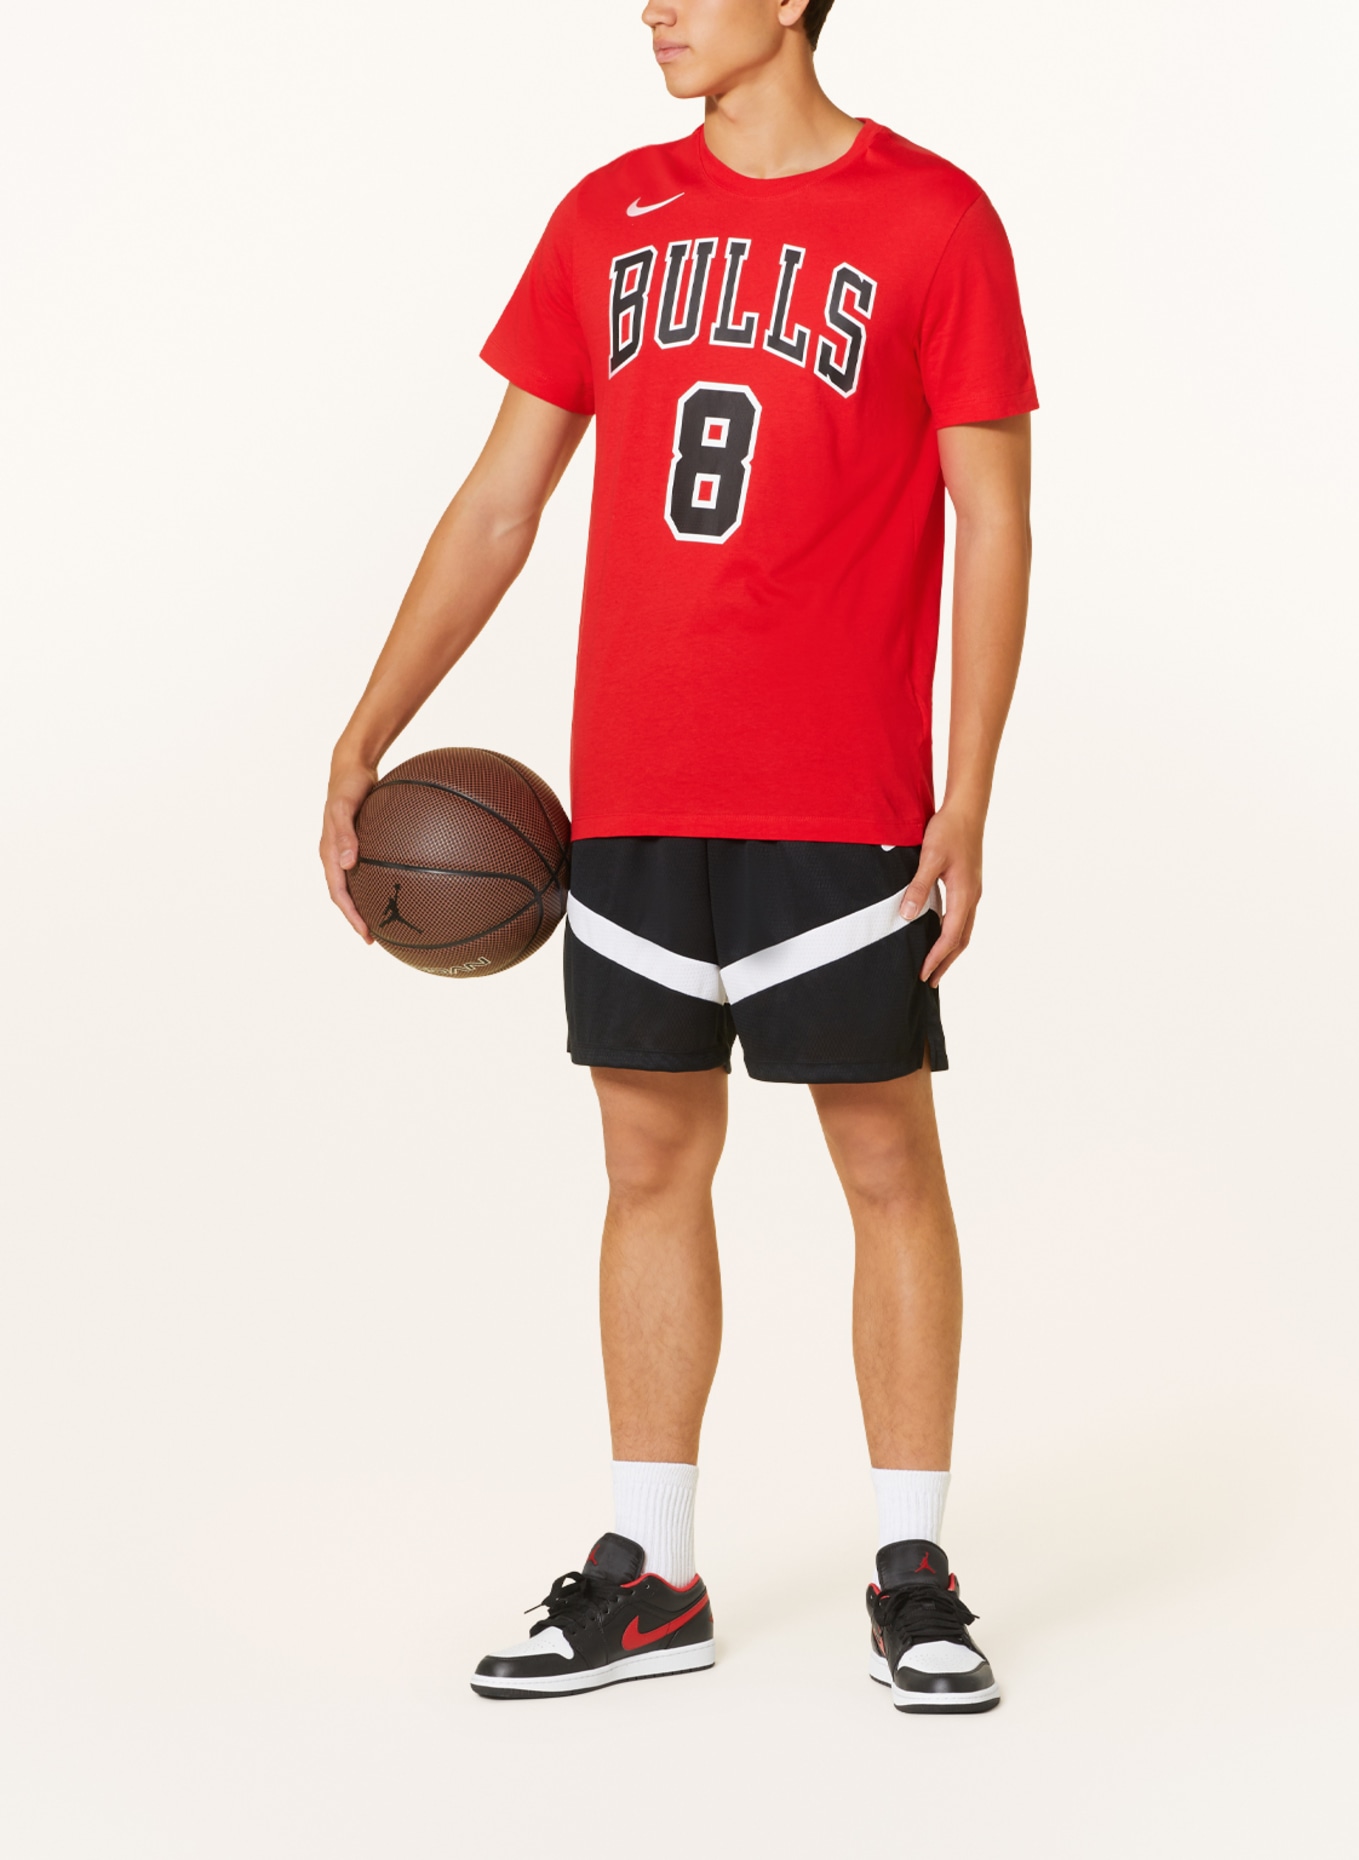 RED NIKE SNEAKERS & CHICAGO BULLS SHIRT - Style Over Function